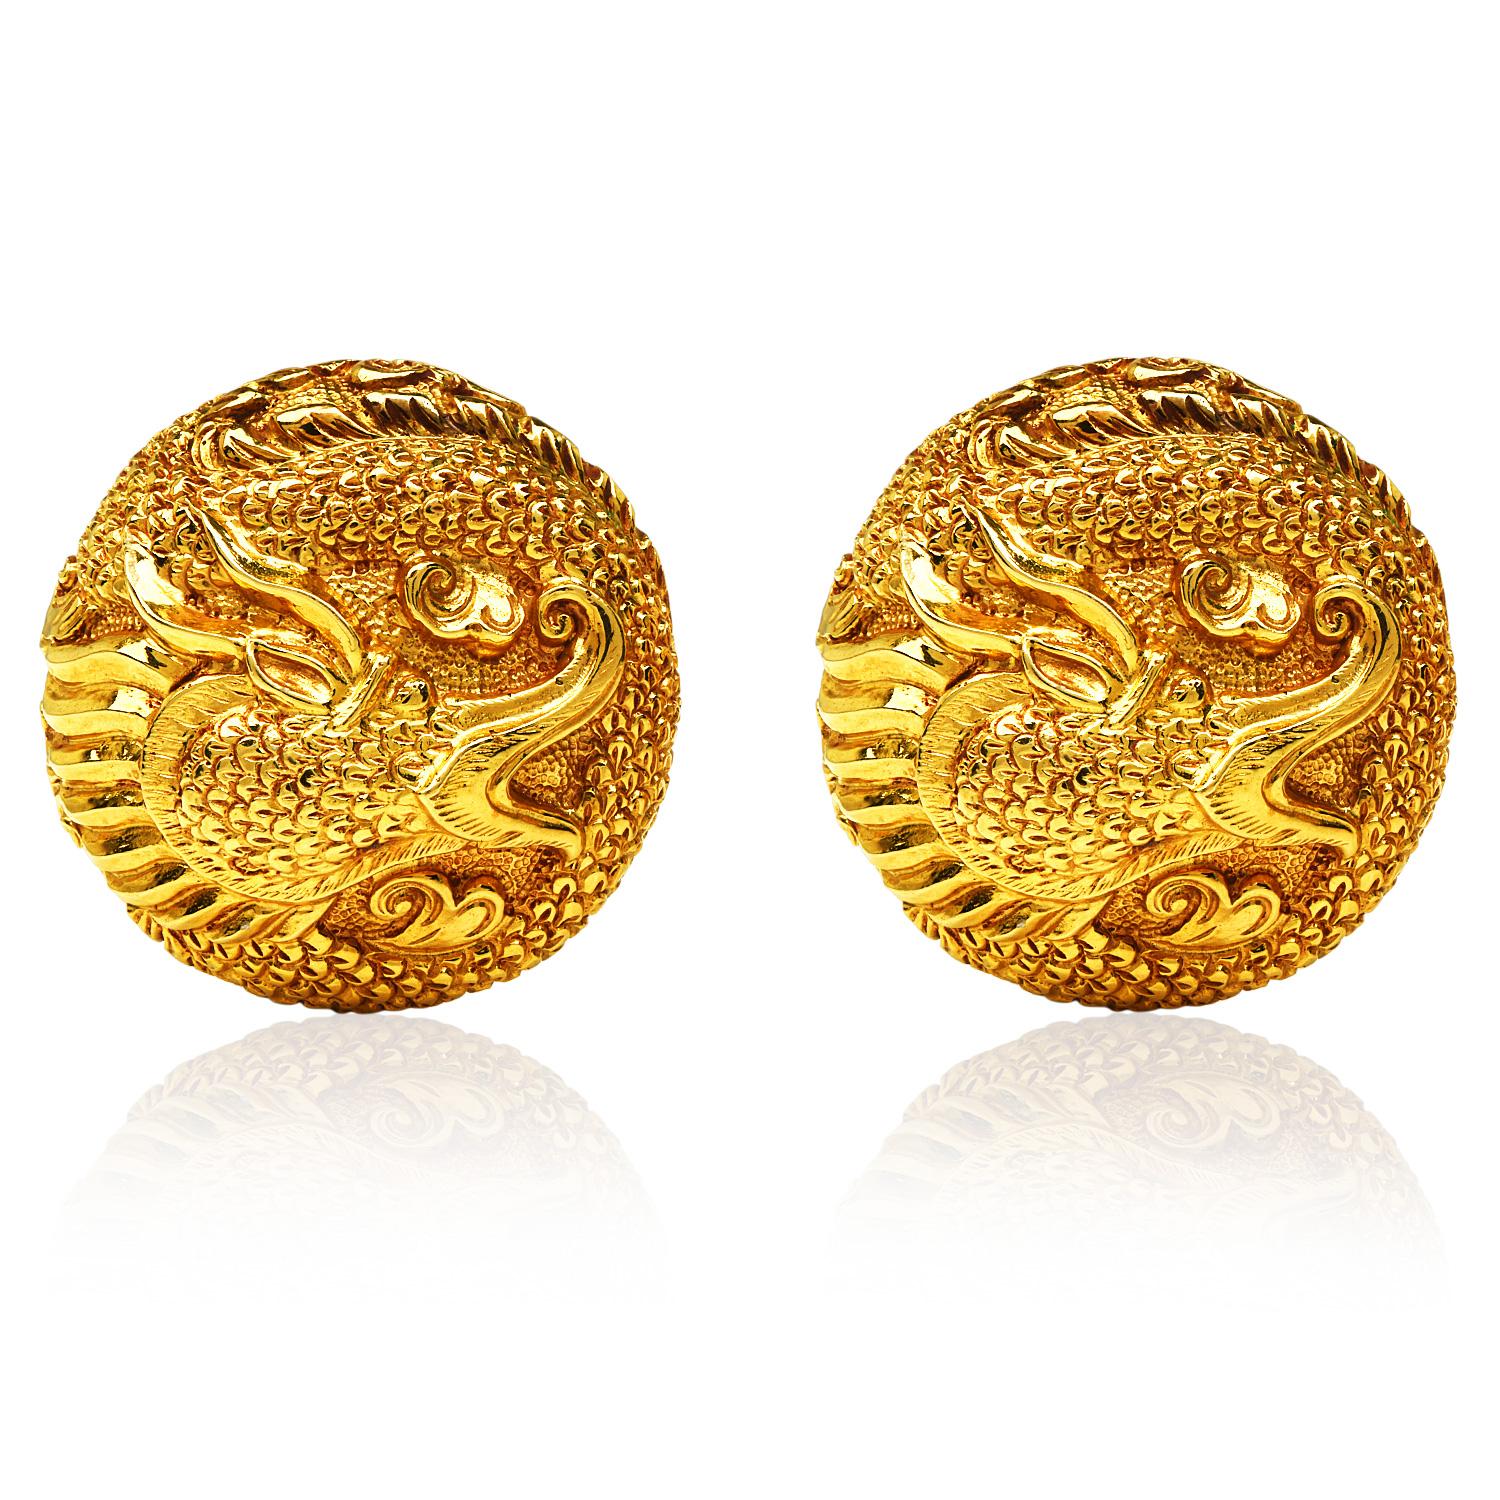 Enjoy the luxury look from these Asian Dragon-inspired, round-shaped earrings.

Showing a powerful theme and craftmanship, Crafted in 18K yellow gold, finished in a textured high polished gold.

Each piece measures approximately 1.25